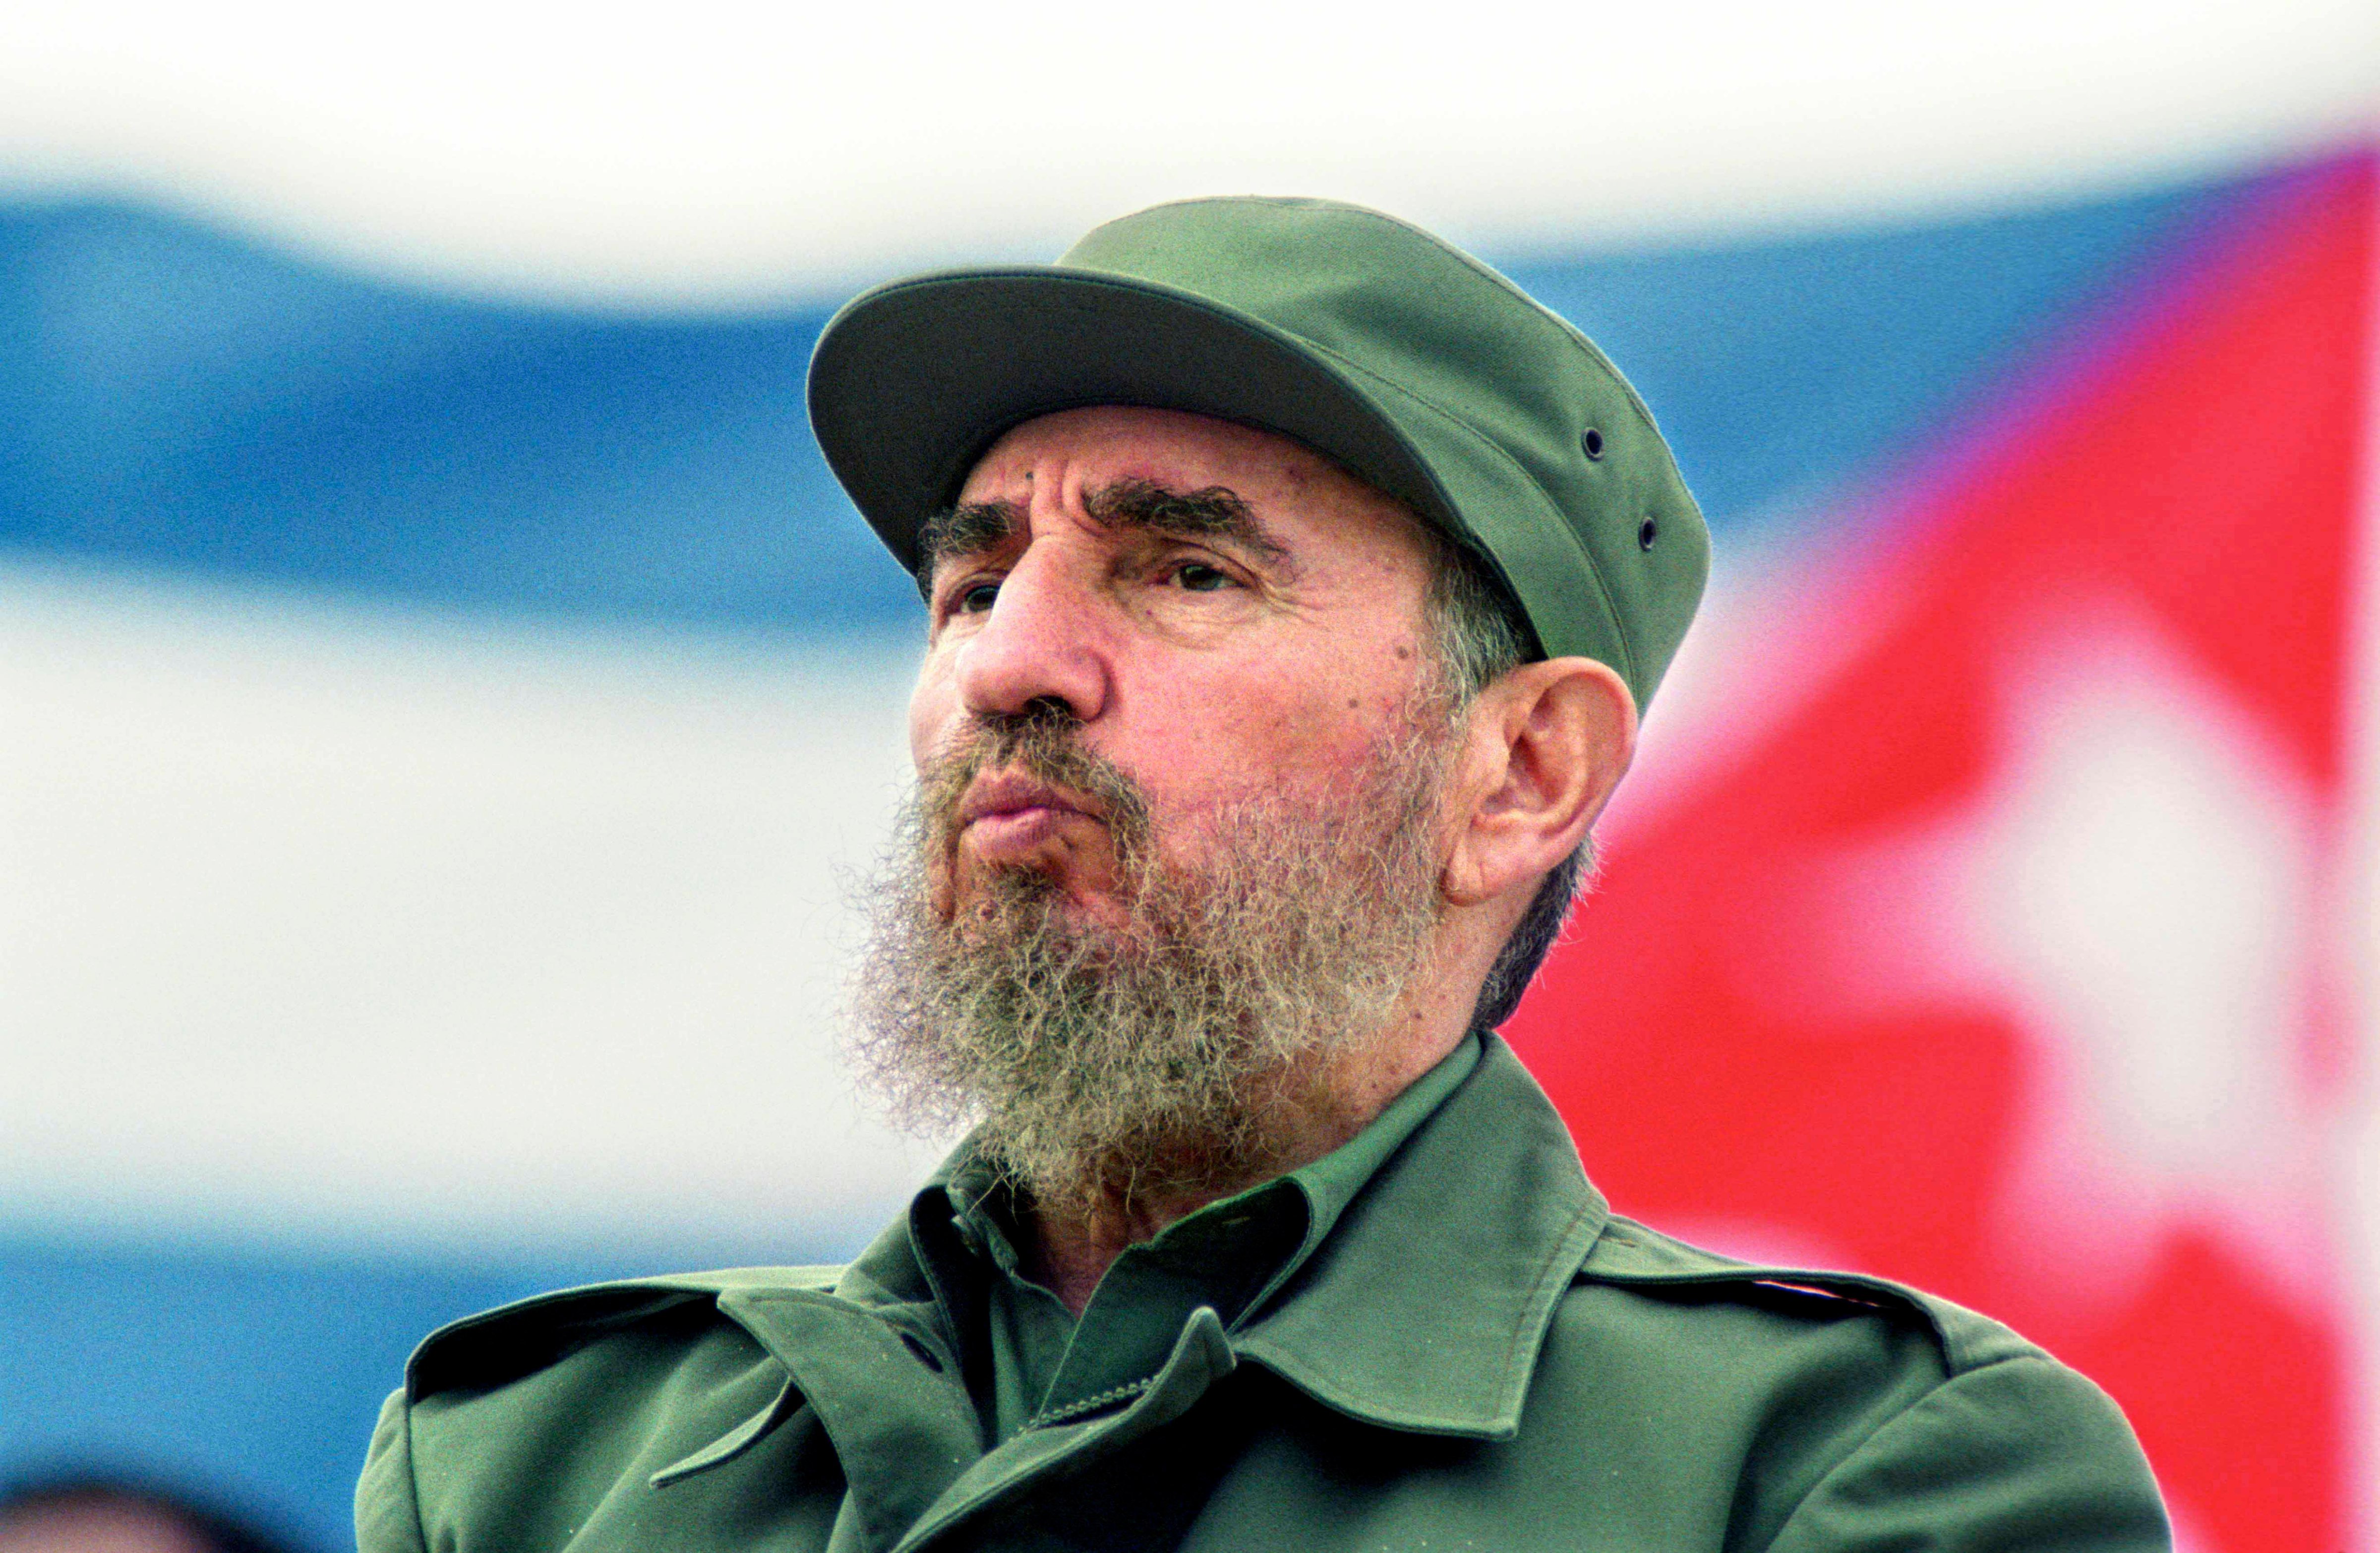 Fidel Castro observes the May Day parade at the Revolution Square in Havana, Cuba May 1, 1998. (Sven Creutzmann/Mambo Photo—Getty Images)